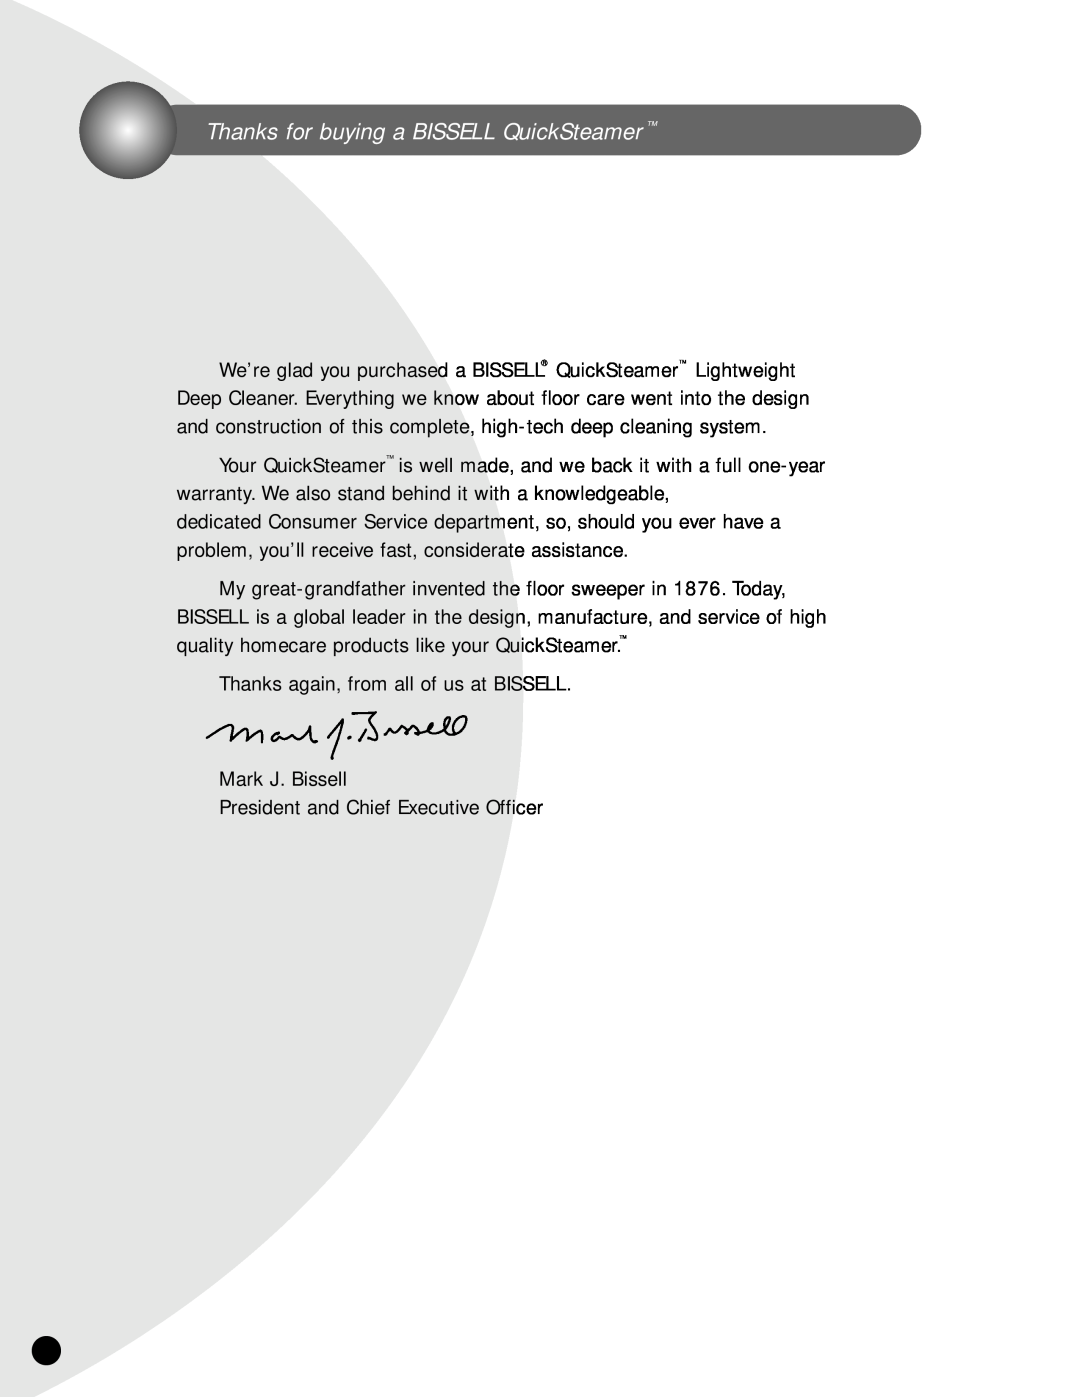 Bissell 1950 warranty Thanks again, from all of us at BISSELL Mark J. Bissell, President and Chief Executive Officer 